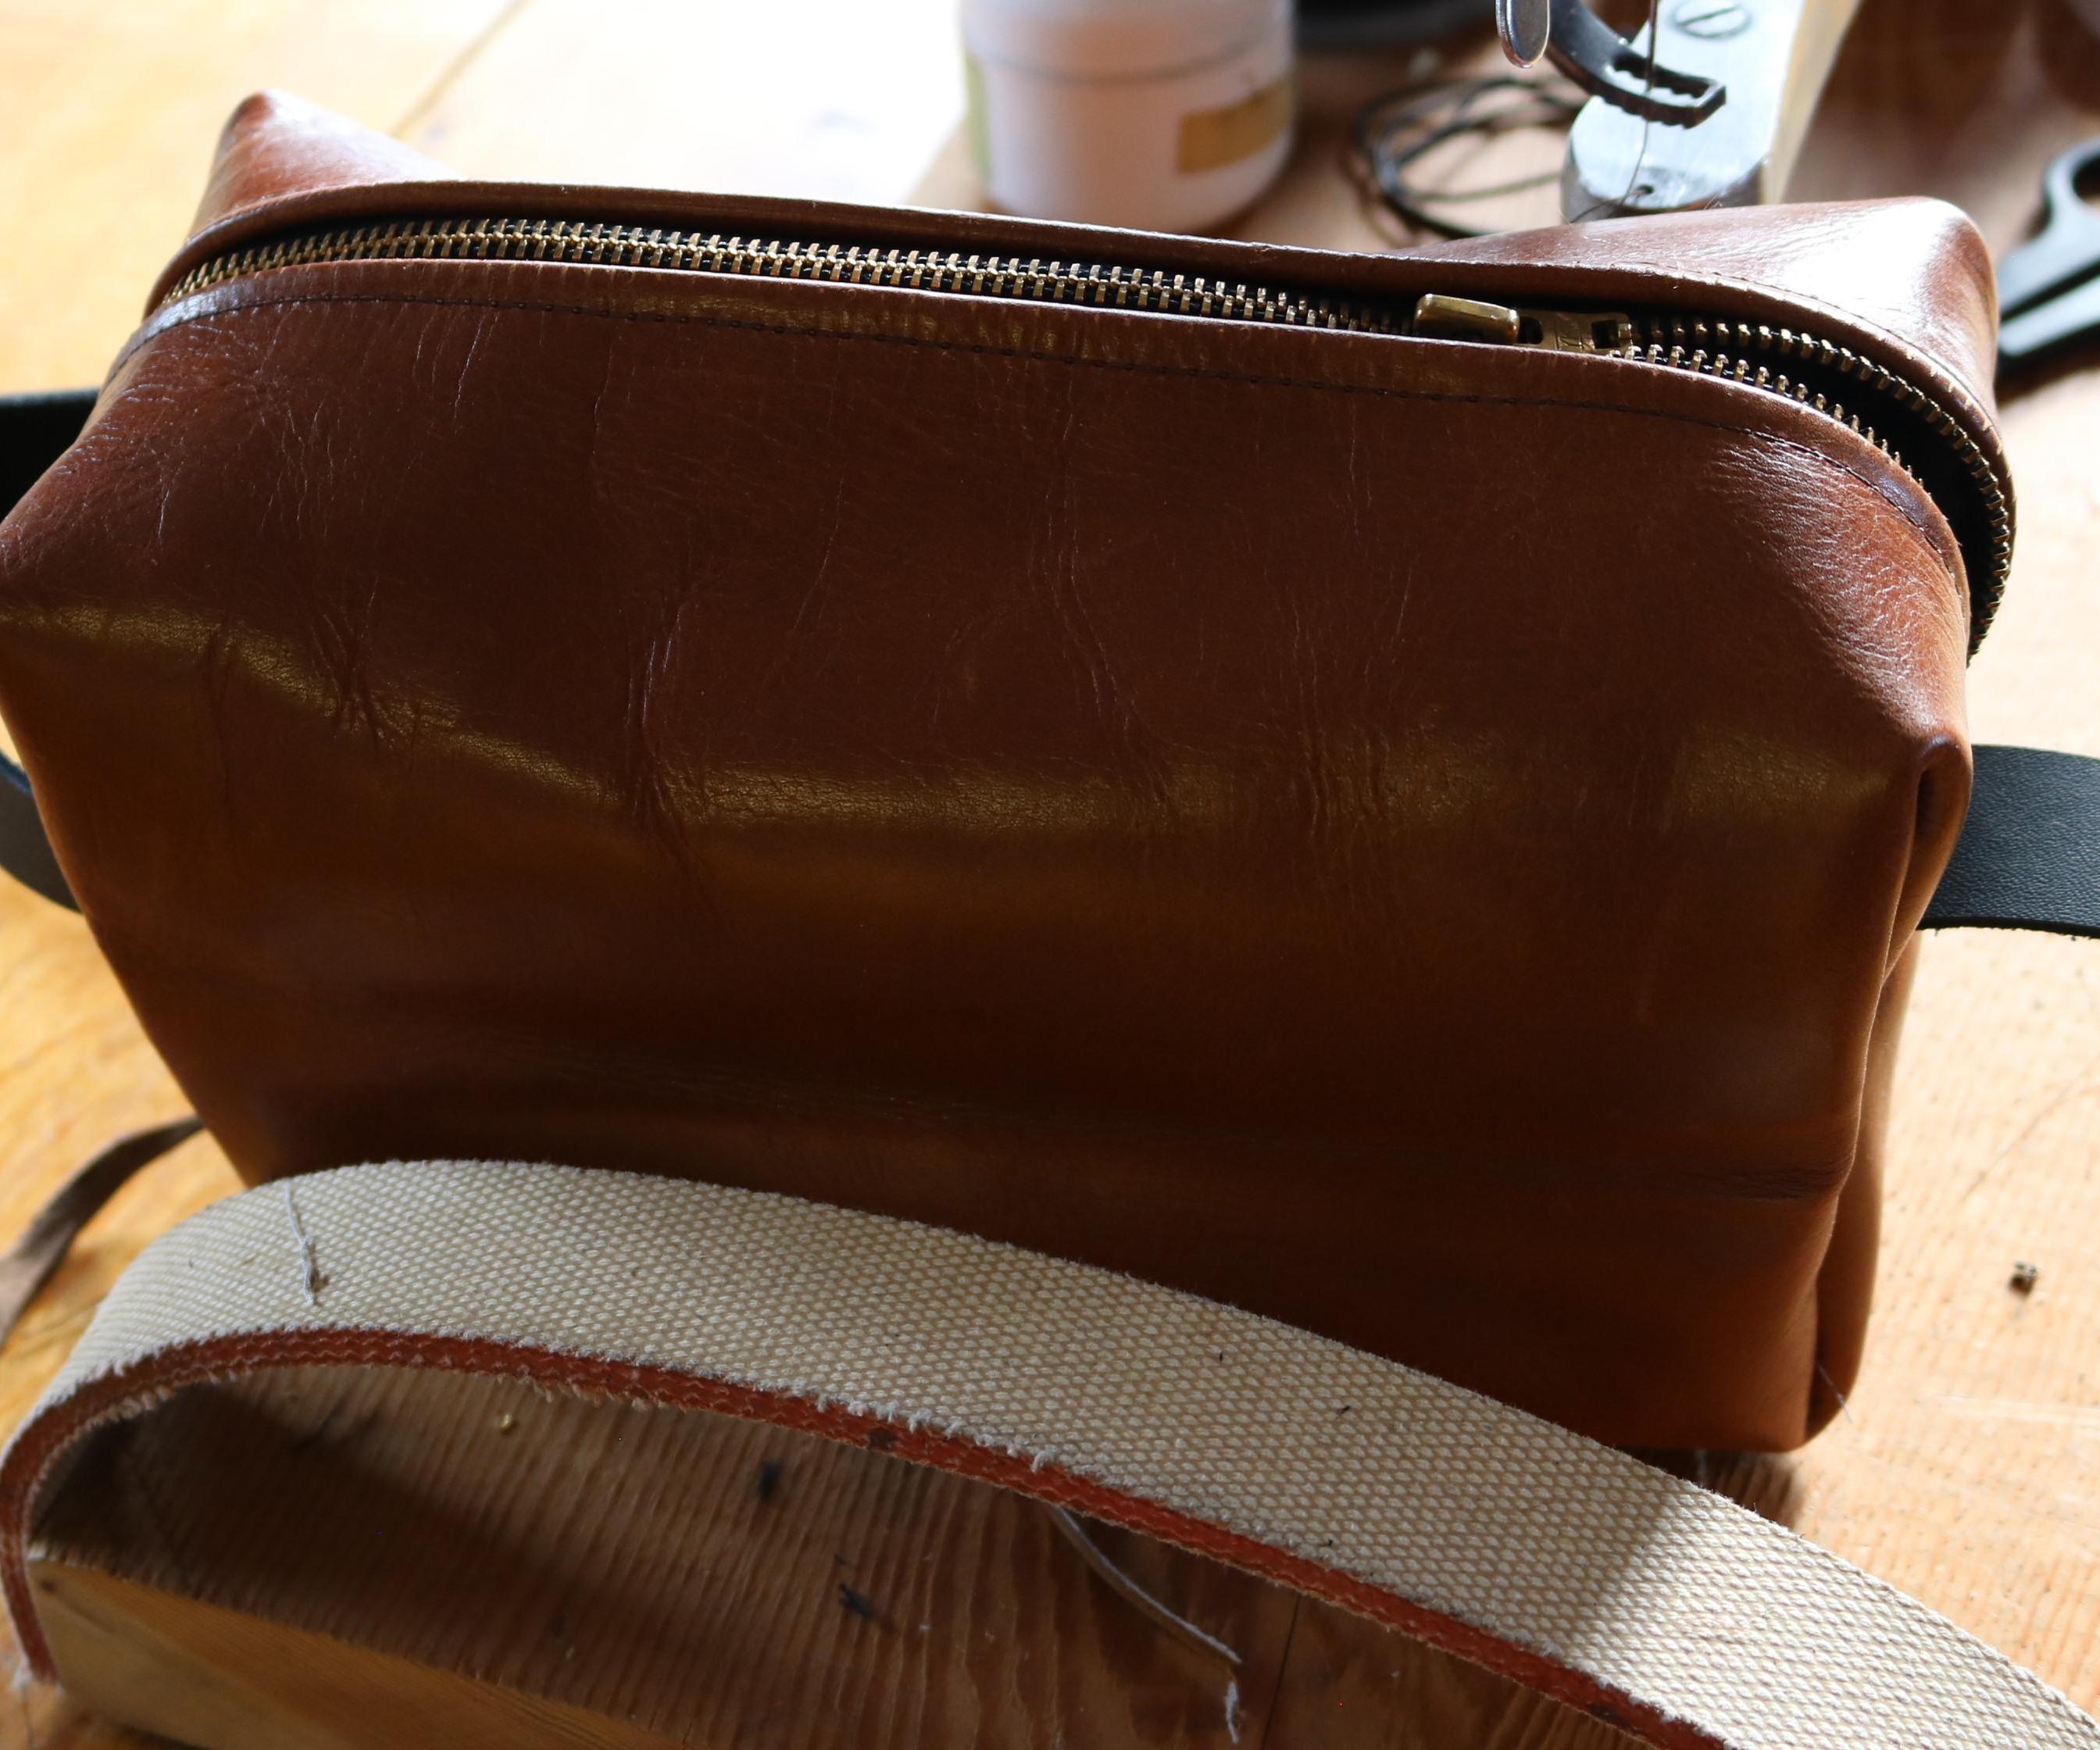 How to Make a Leather Dopp Kit